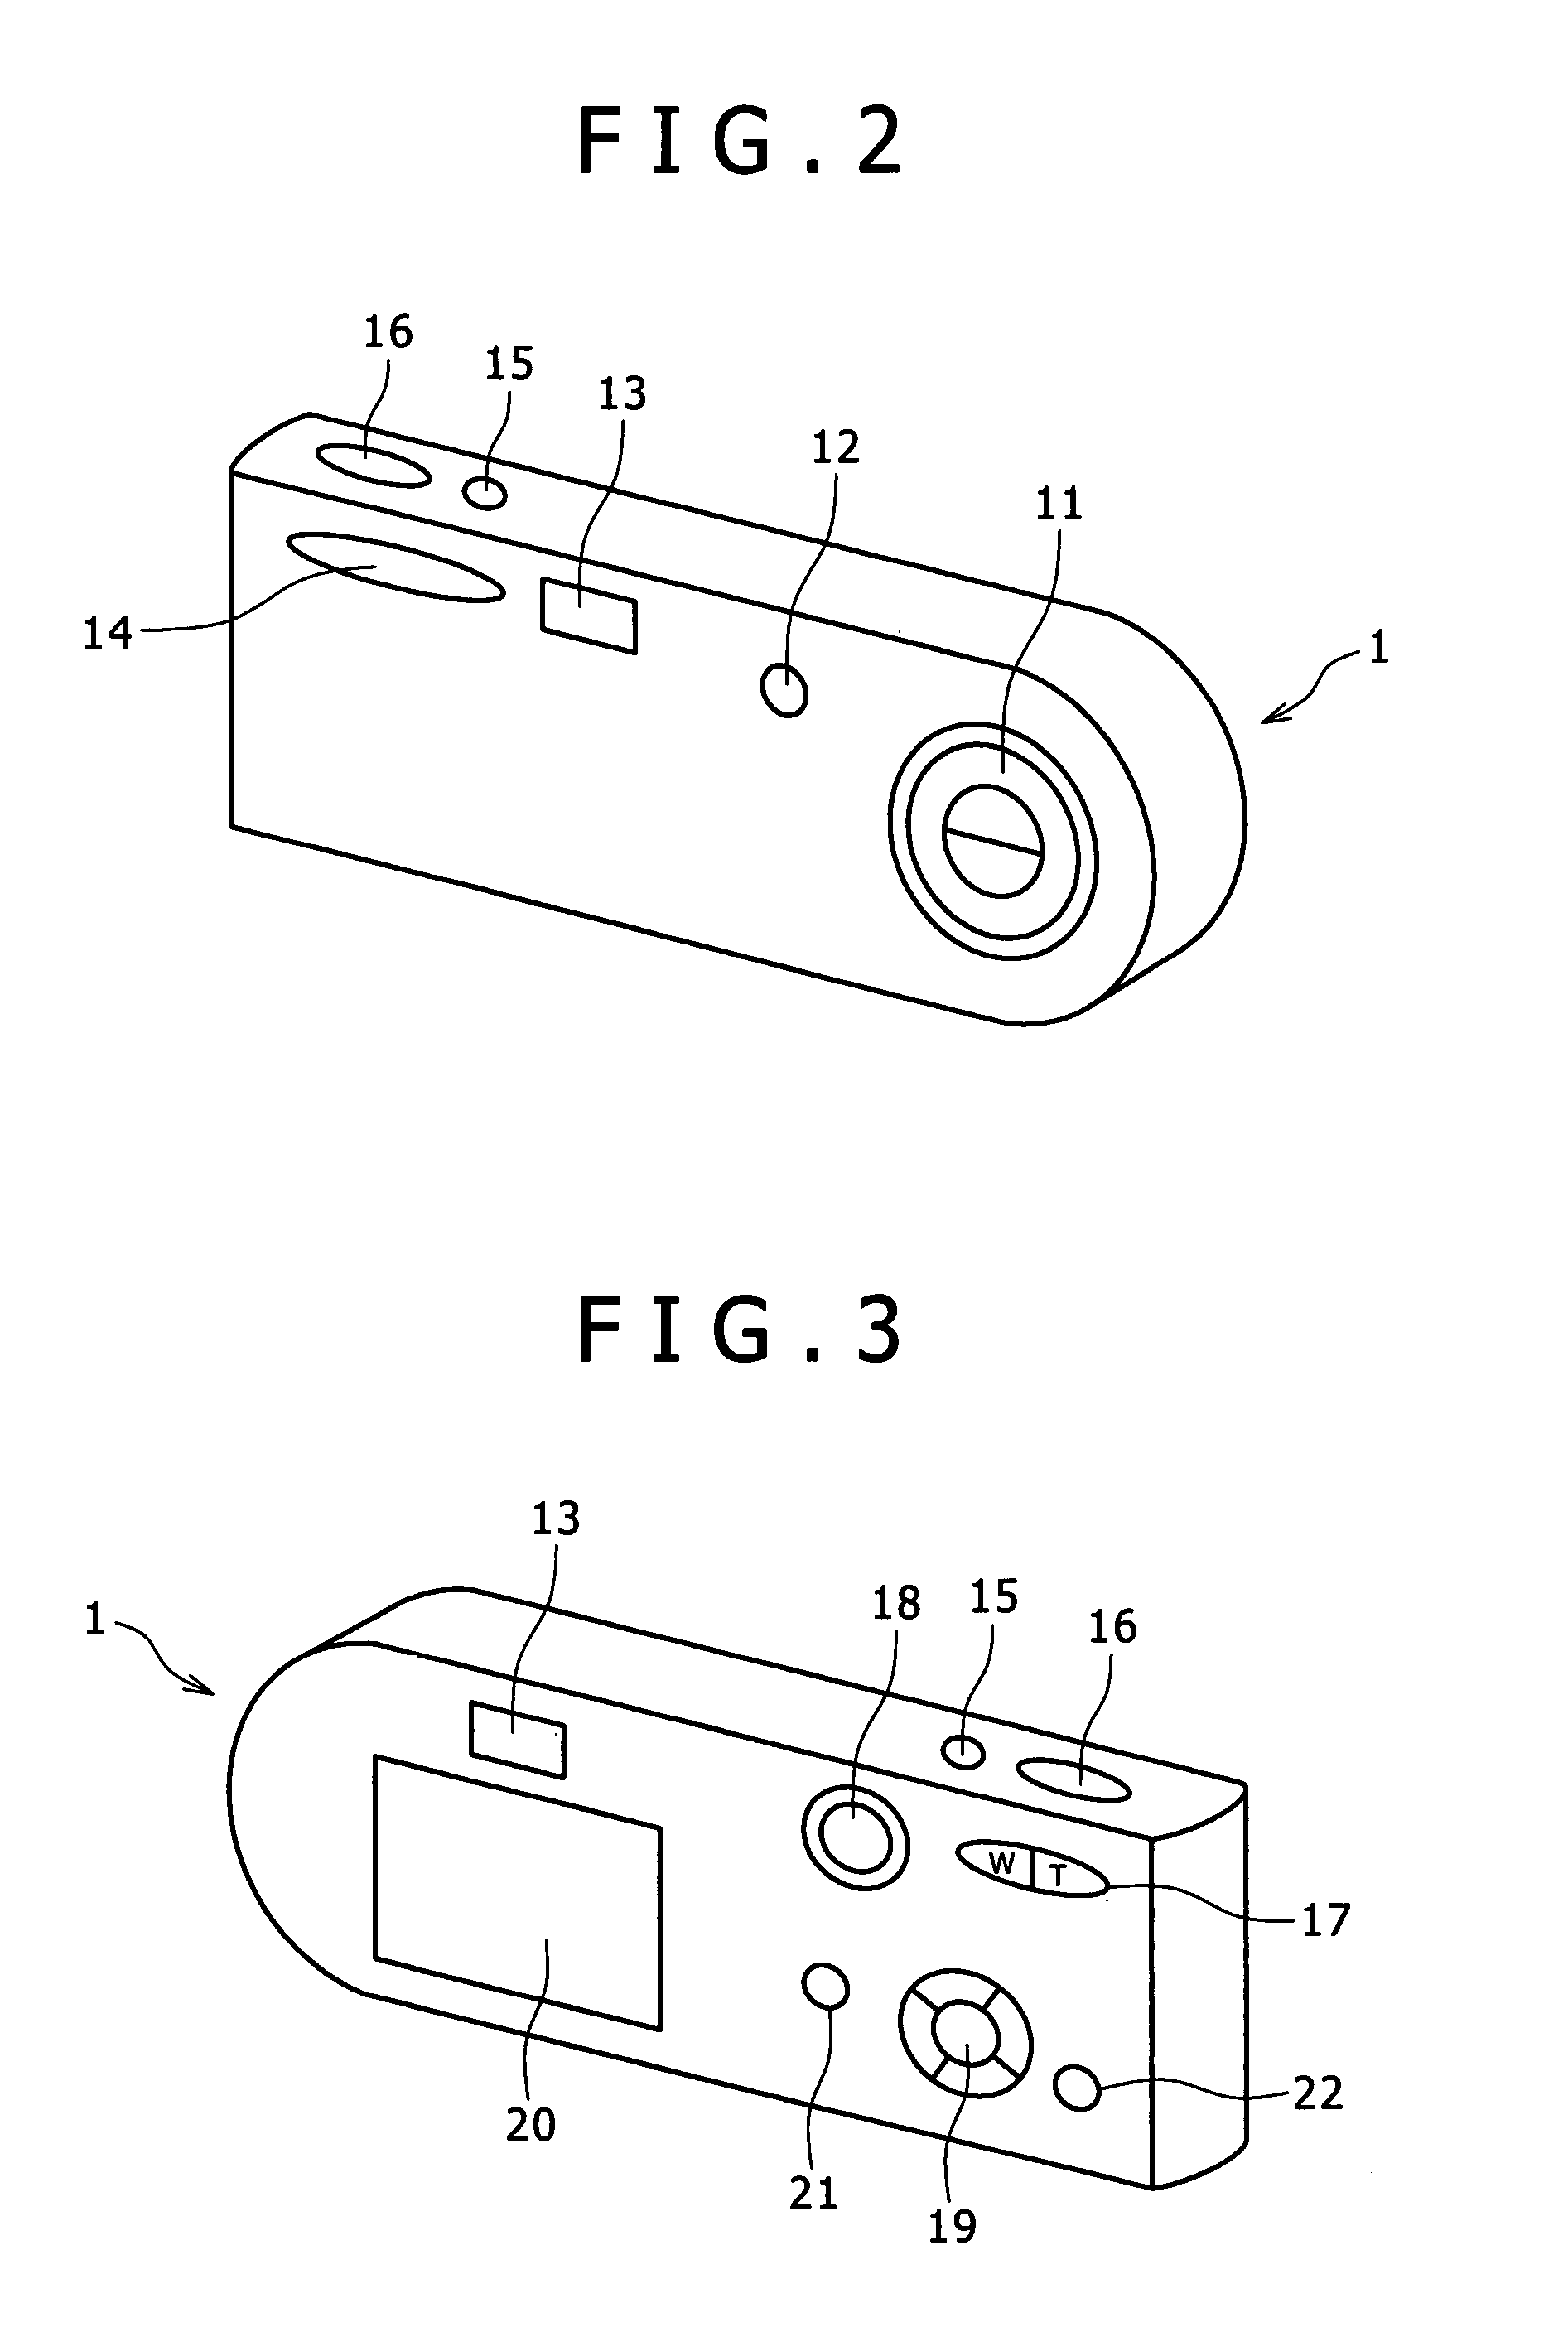 Image taking apparatus and method with display and image storage communication with other image taking apparatus